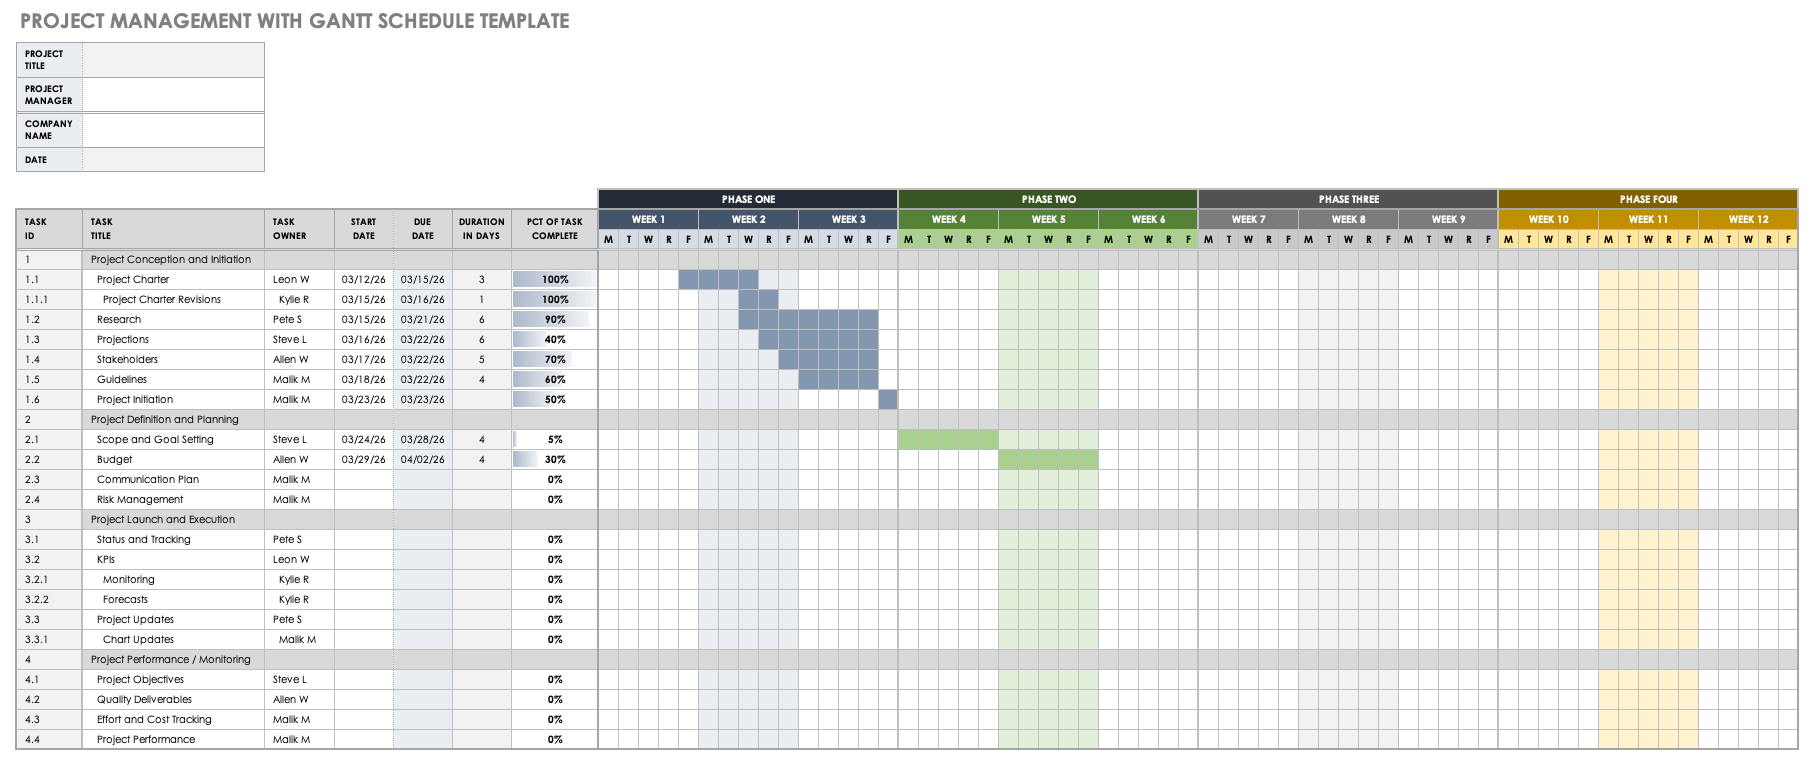 Project Management with Gantt Schedule Template